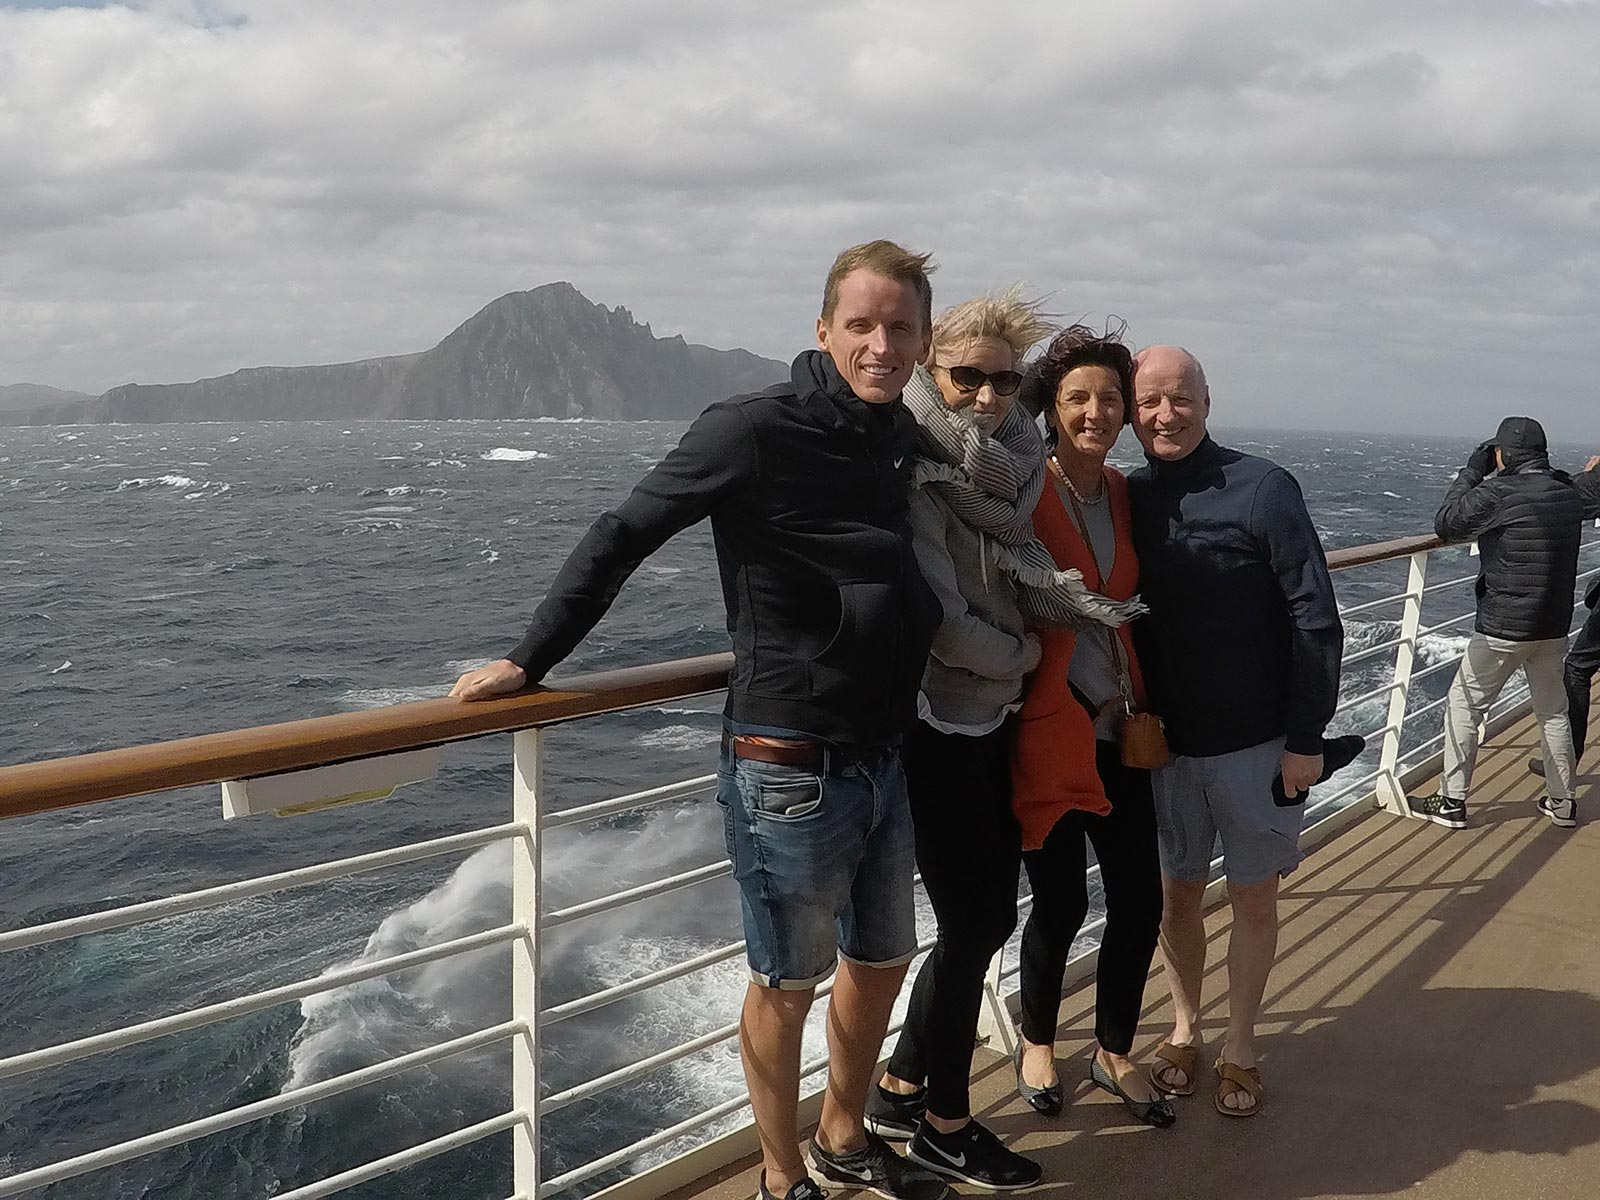 David Simpson and family viewing Cape Horn onboard cruise ship at sea. Cape Horn on the Cruise to the end of the world